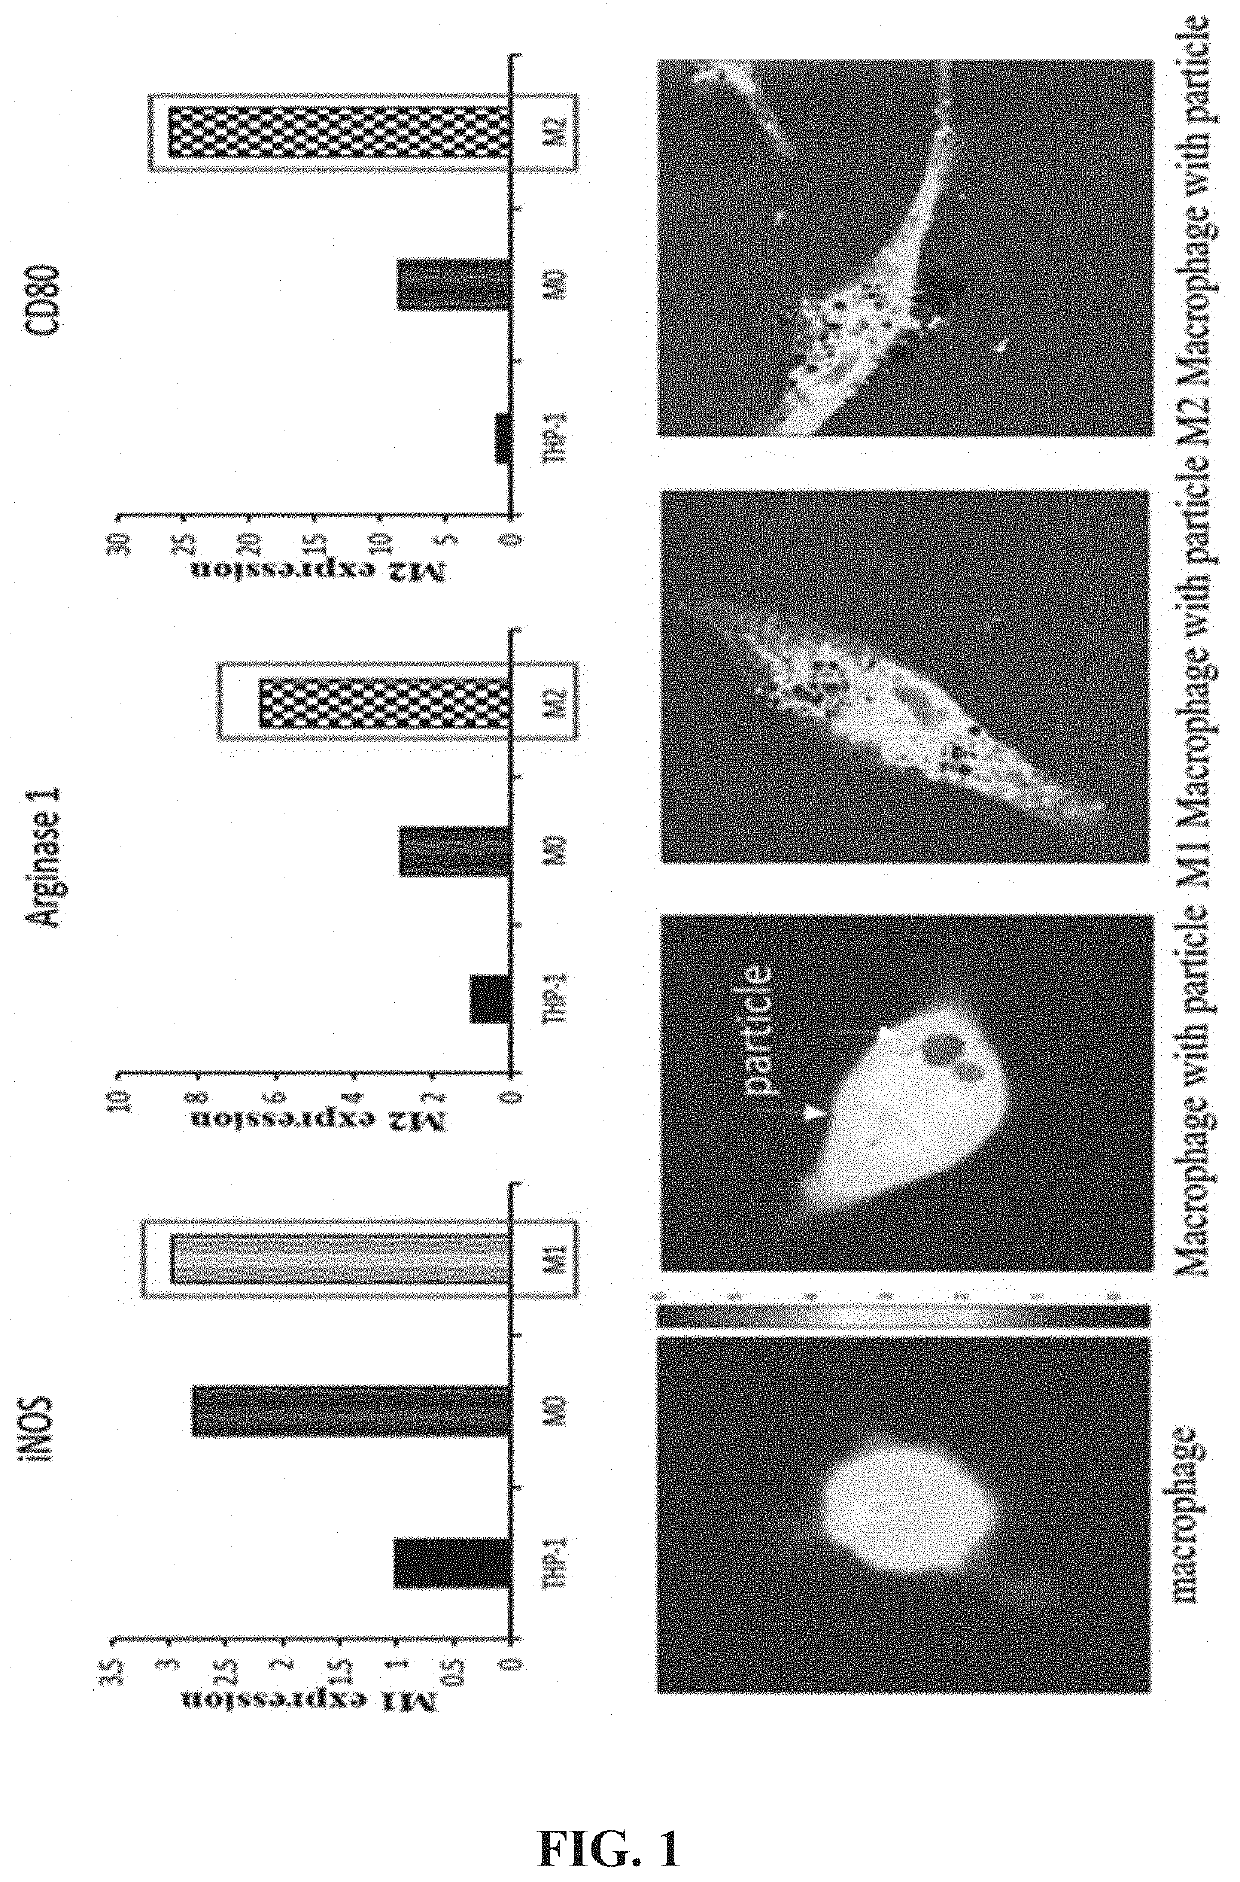 Cancer cell-targeted drug delivery carrier and composition for promoting photo-thermal treatment effects, both of which contain m1 macrophages as active ingredient